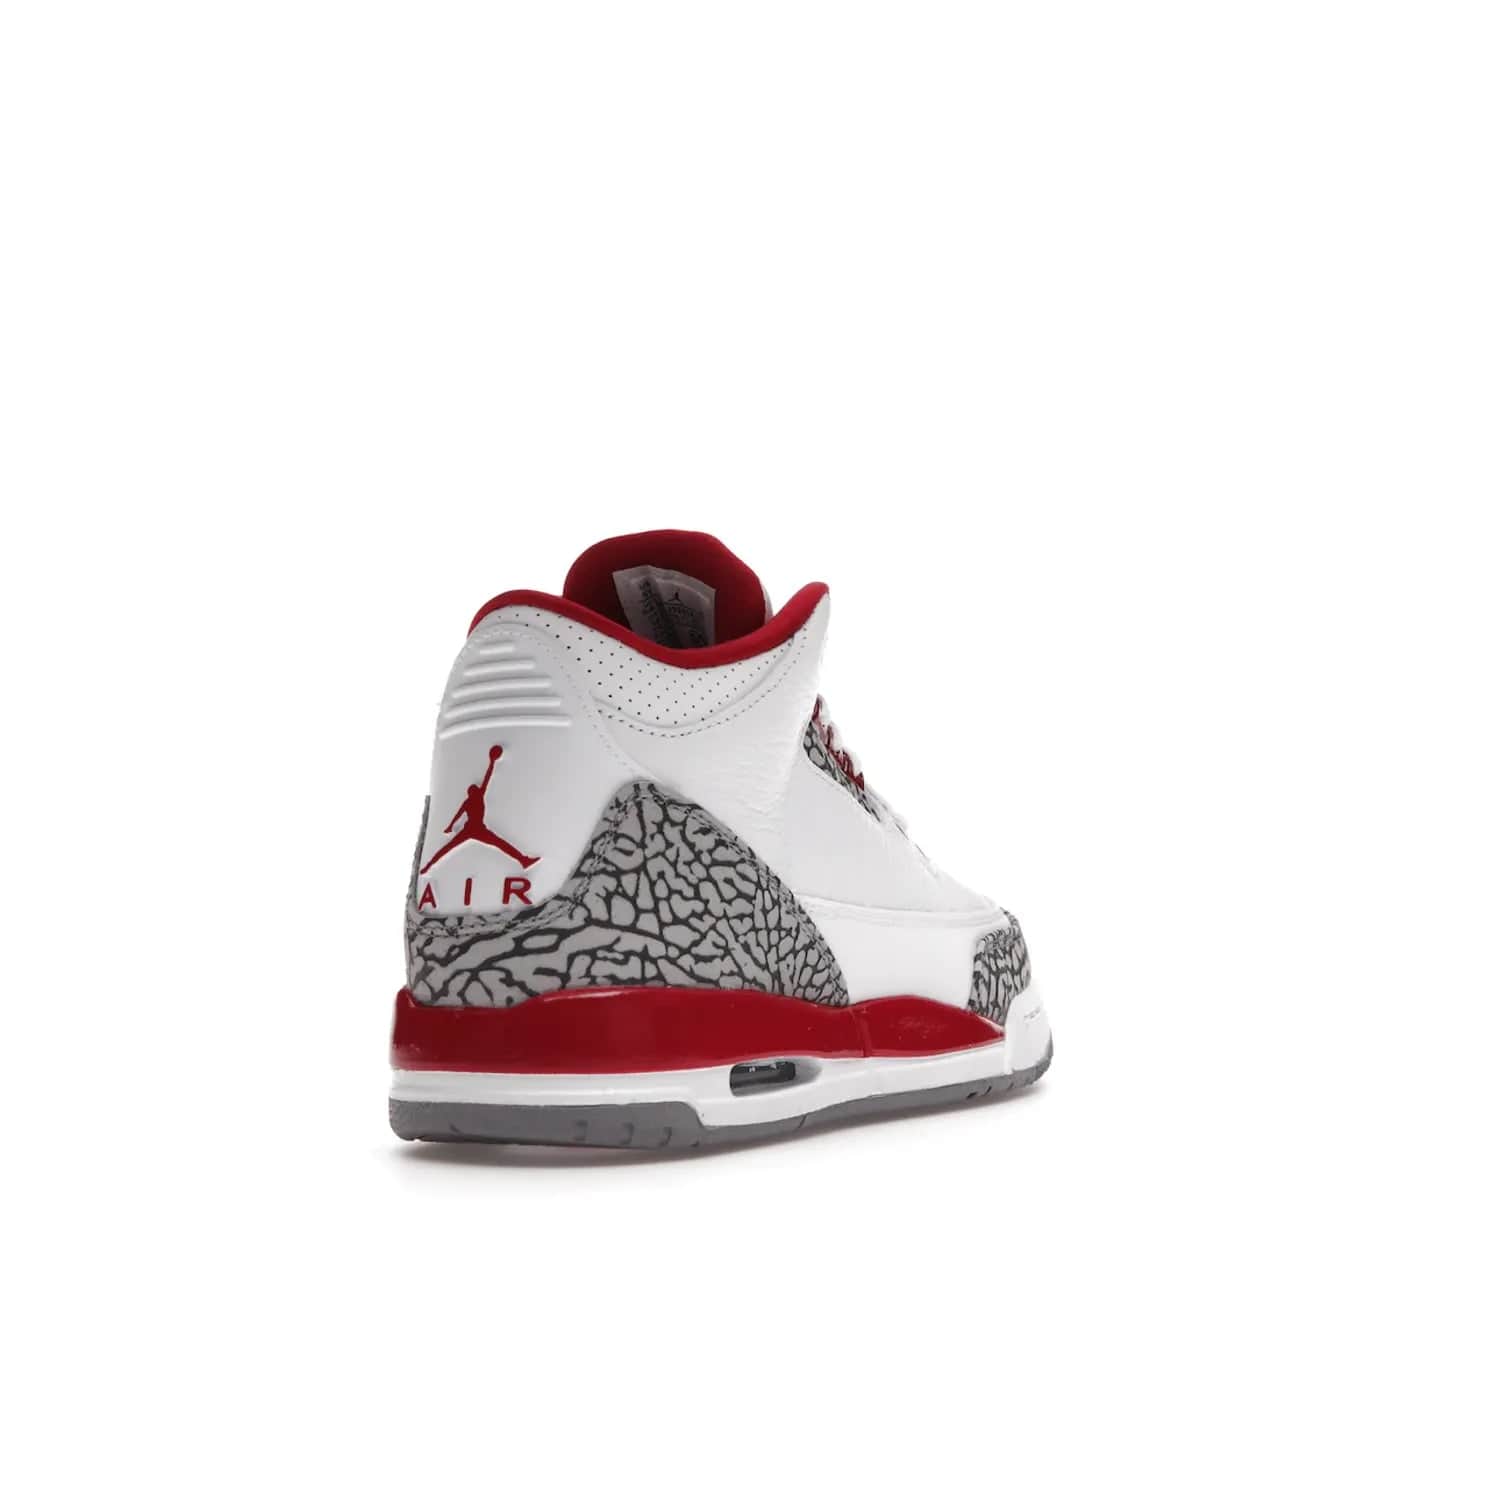 Jordan 3 Retro Cardinal (GS) - Image 31 - Only at www.BallersClubKickz.com - Shop the kid-sized Air Jordan 3 Retro Cardinal GS, released Feb 2022. White tumbled leather upper, light curry accenting, cement grey and classic red details throughout. Visible Air cushioning, midsole, and an eye-catching outsole. Show off your style with this fashionable streetwear silhouette.